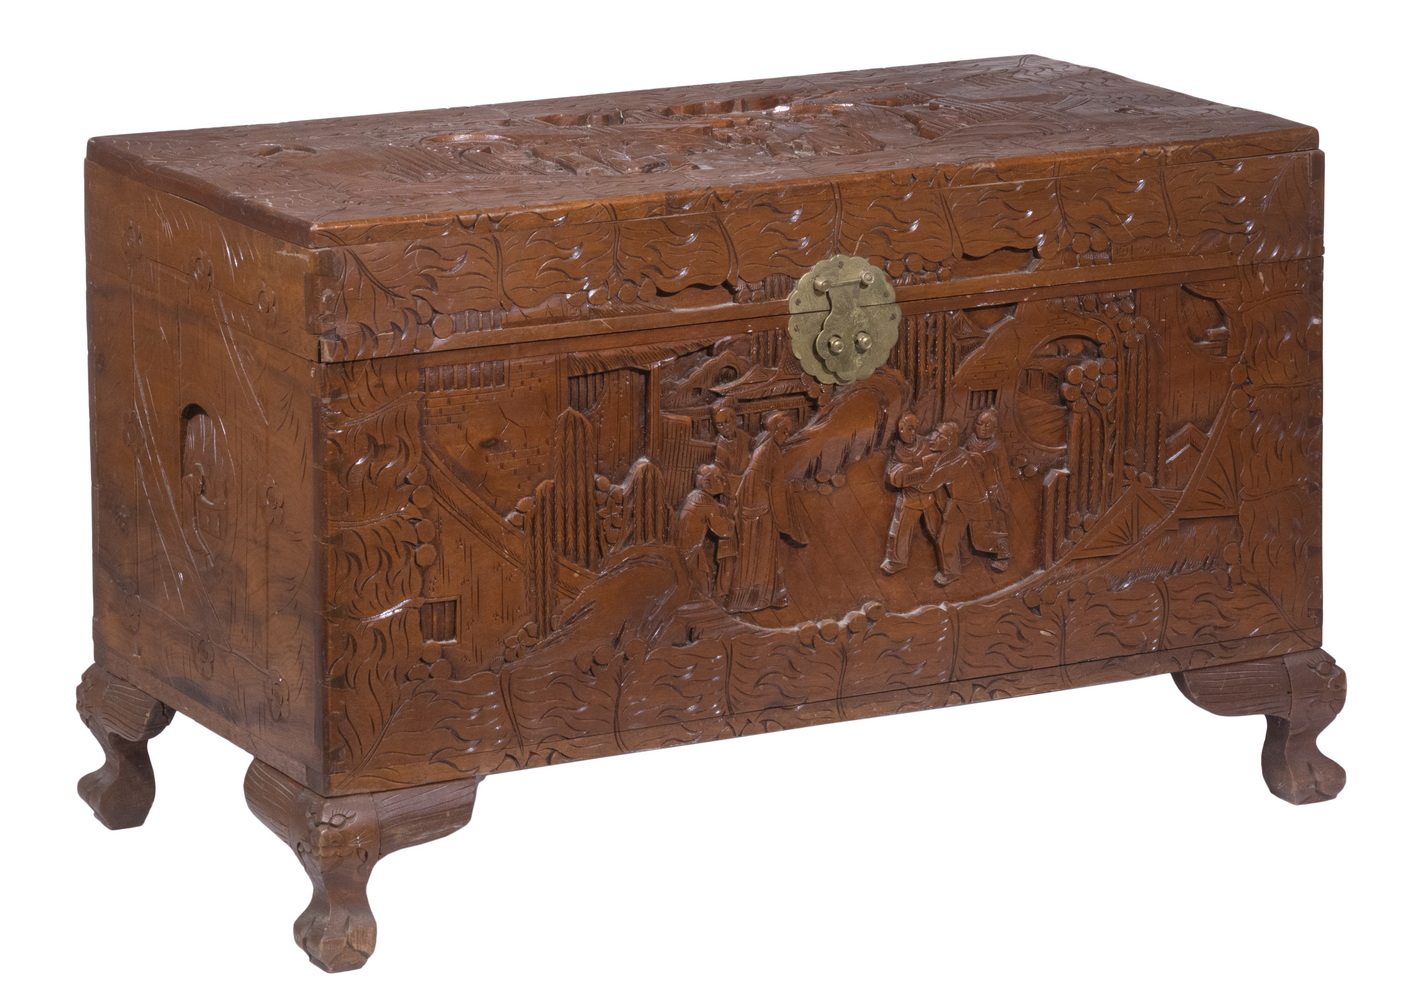 CHINESE CAMPHORWOOD TRUNK Carved